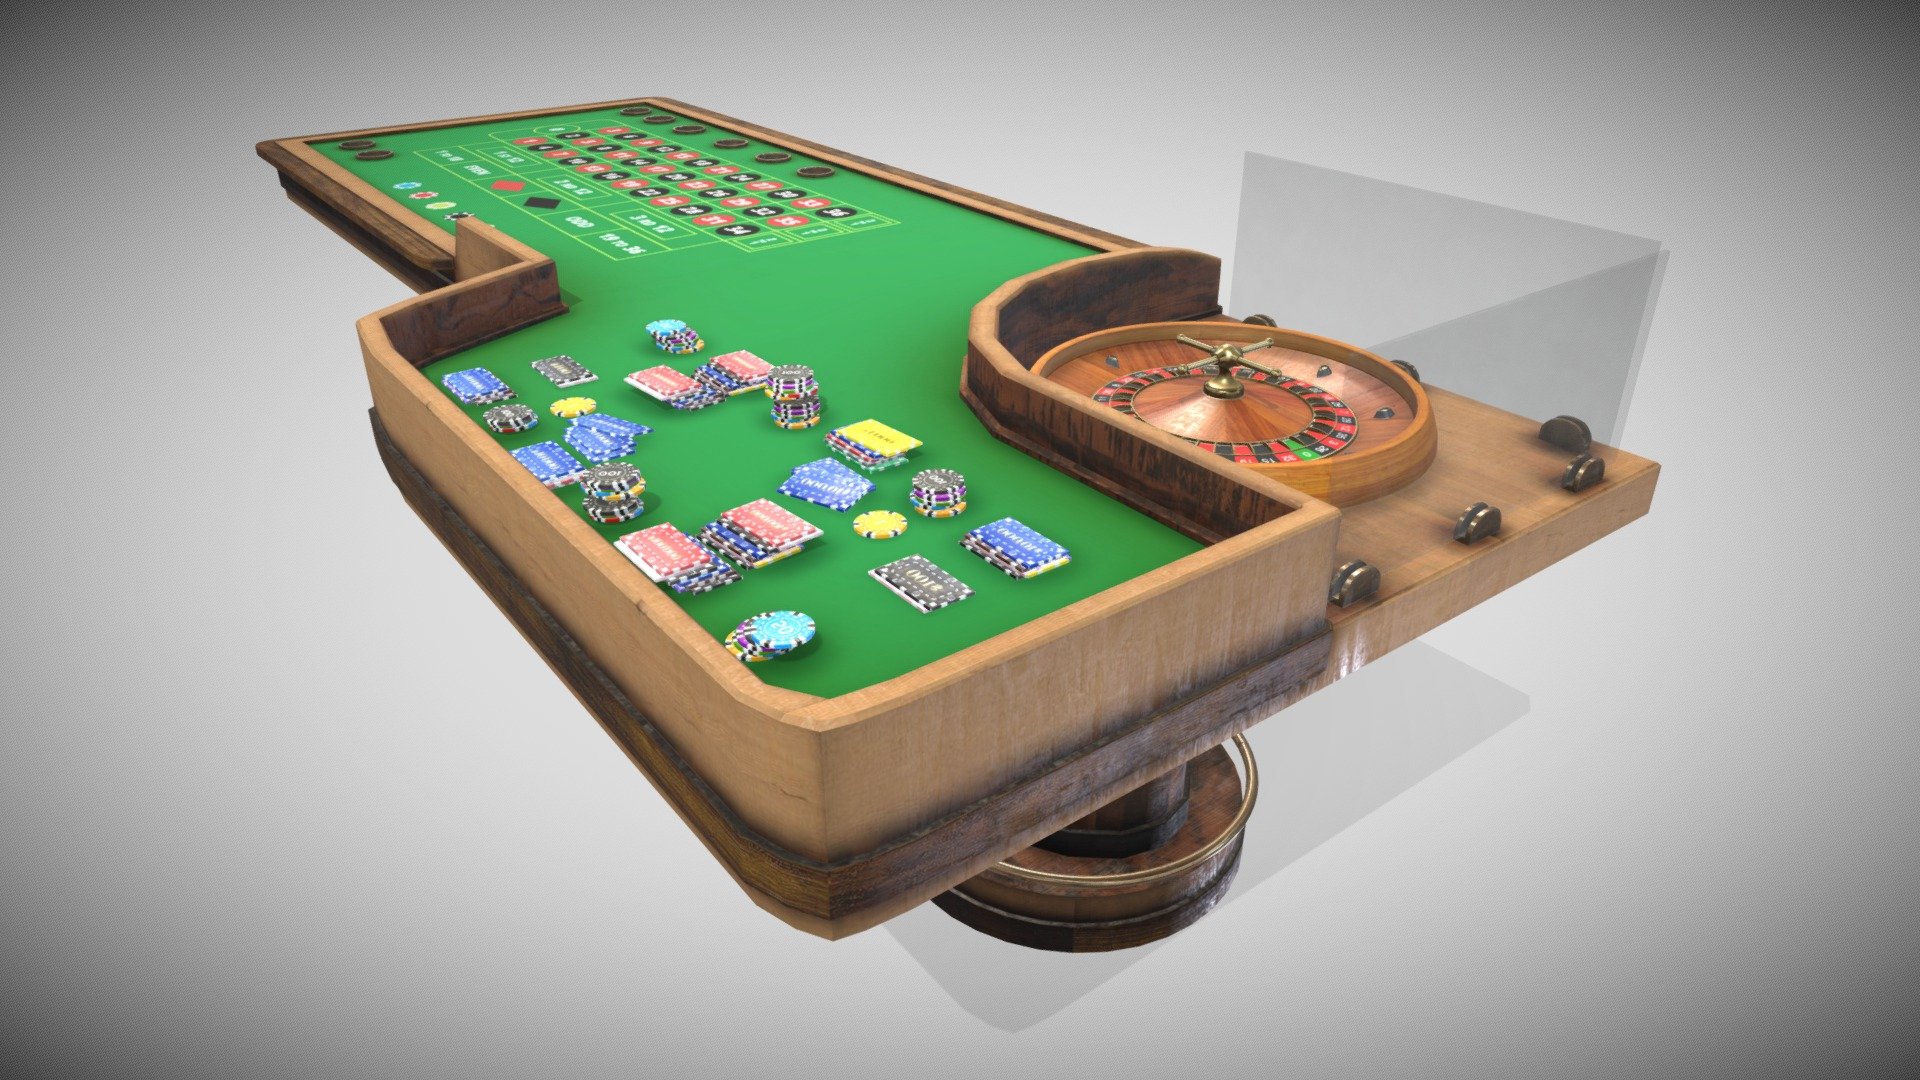 3 Material 4k PBR Metalness

Smoothable.....

Indipendent Objects and Ambient Occlusion

Only Roulette:

https://skfb.ly/oyZ7J - Roulette Desk - Buy Royalty Free 3D model by Francesco Coldesina (@topfrank2013) 3d model